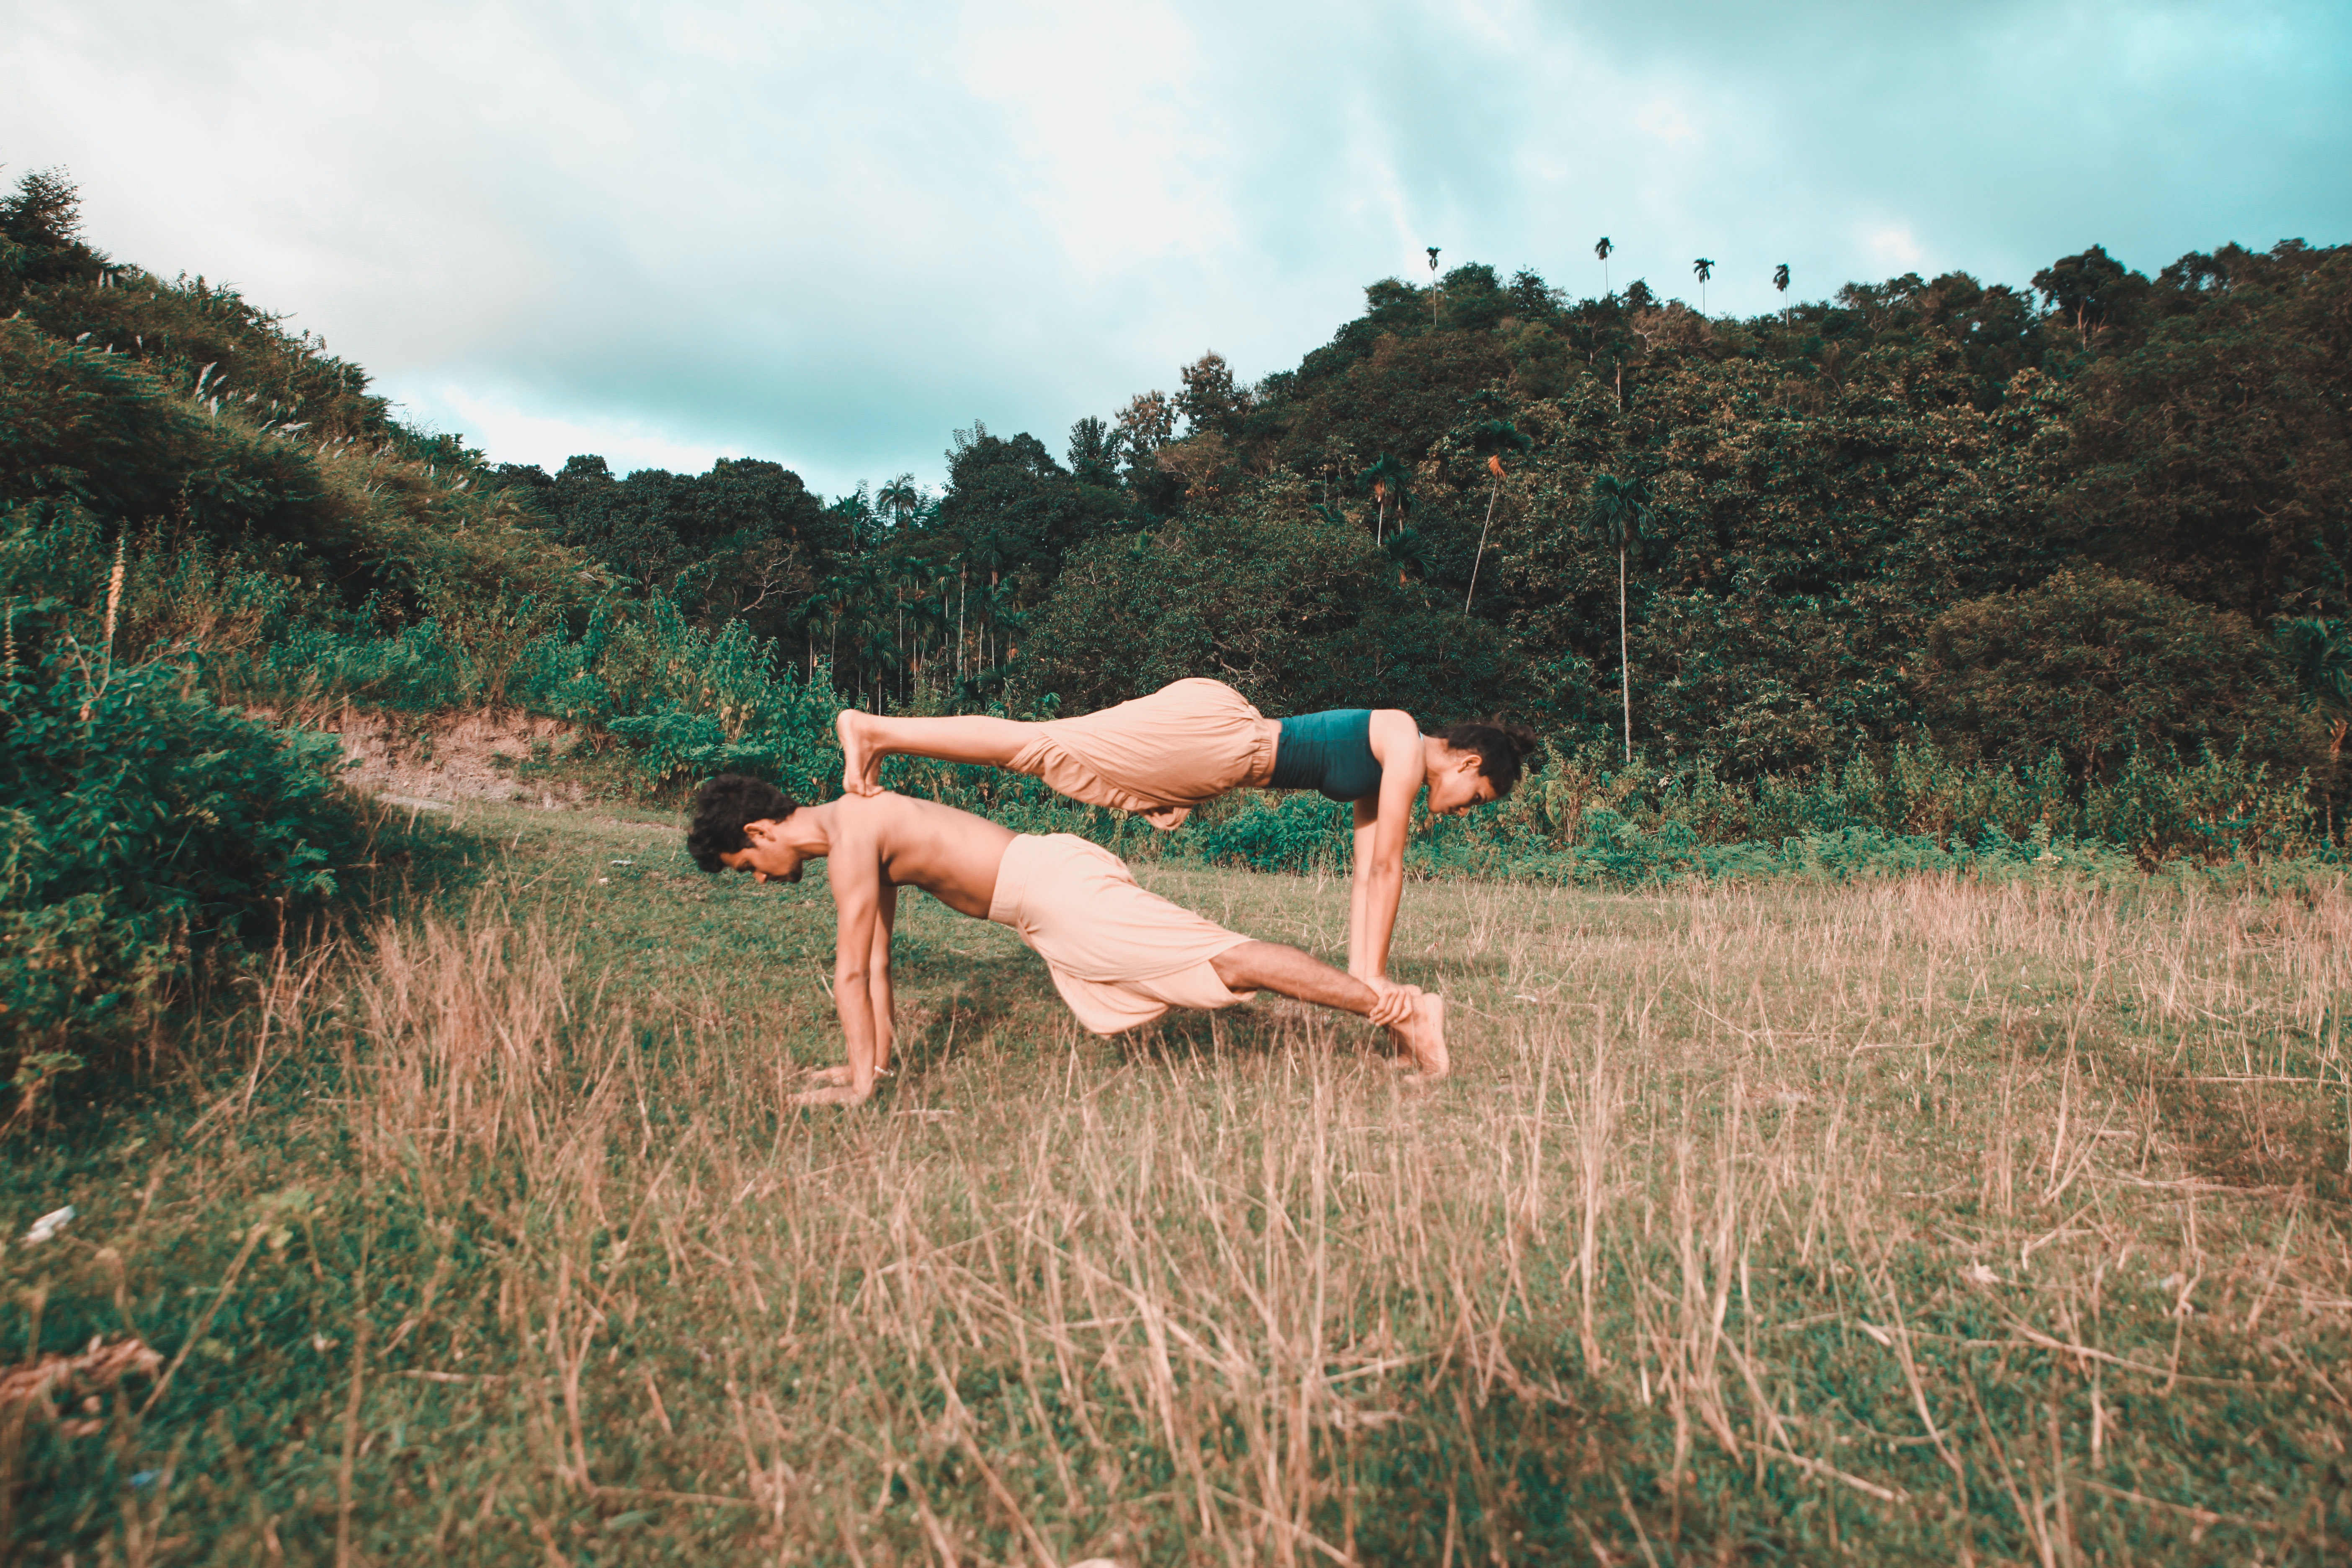 A couple practicing yoga together. | Source: Pexels